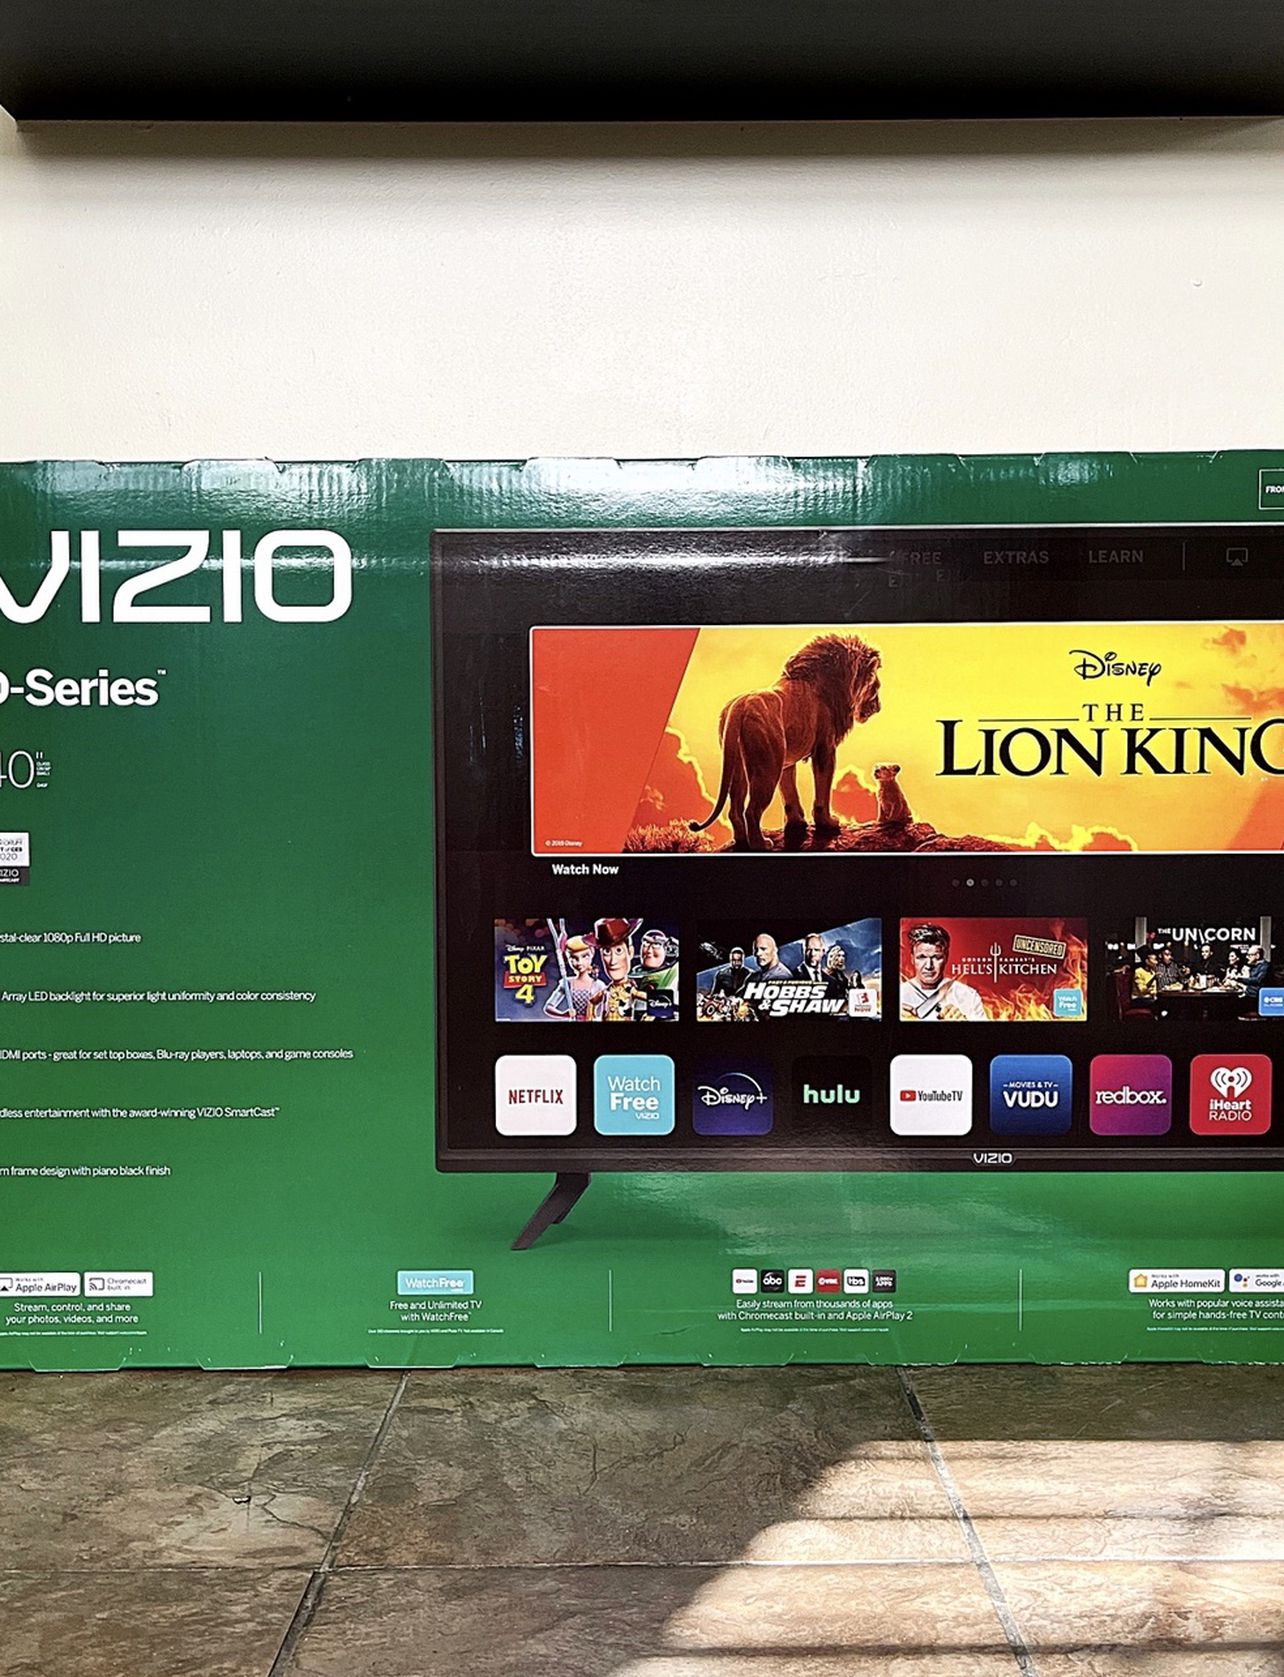 New! VIZIO 40in D-Series TV paid $225 Brand new never used! Stunning LED HD TV. It provides easy access to streaming apps such as Netflix and more tha